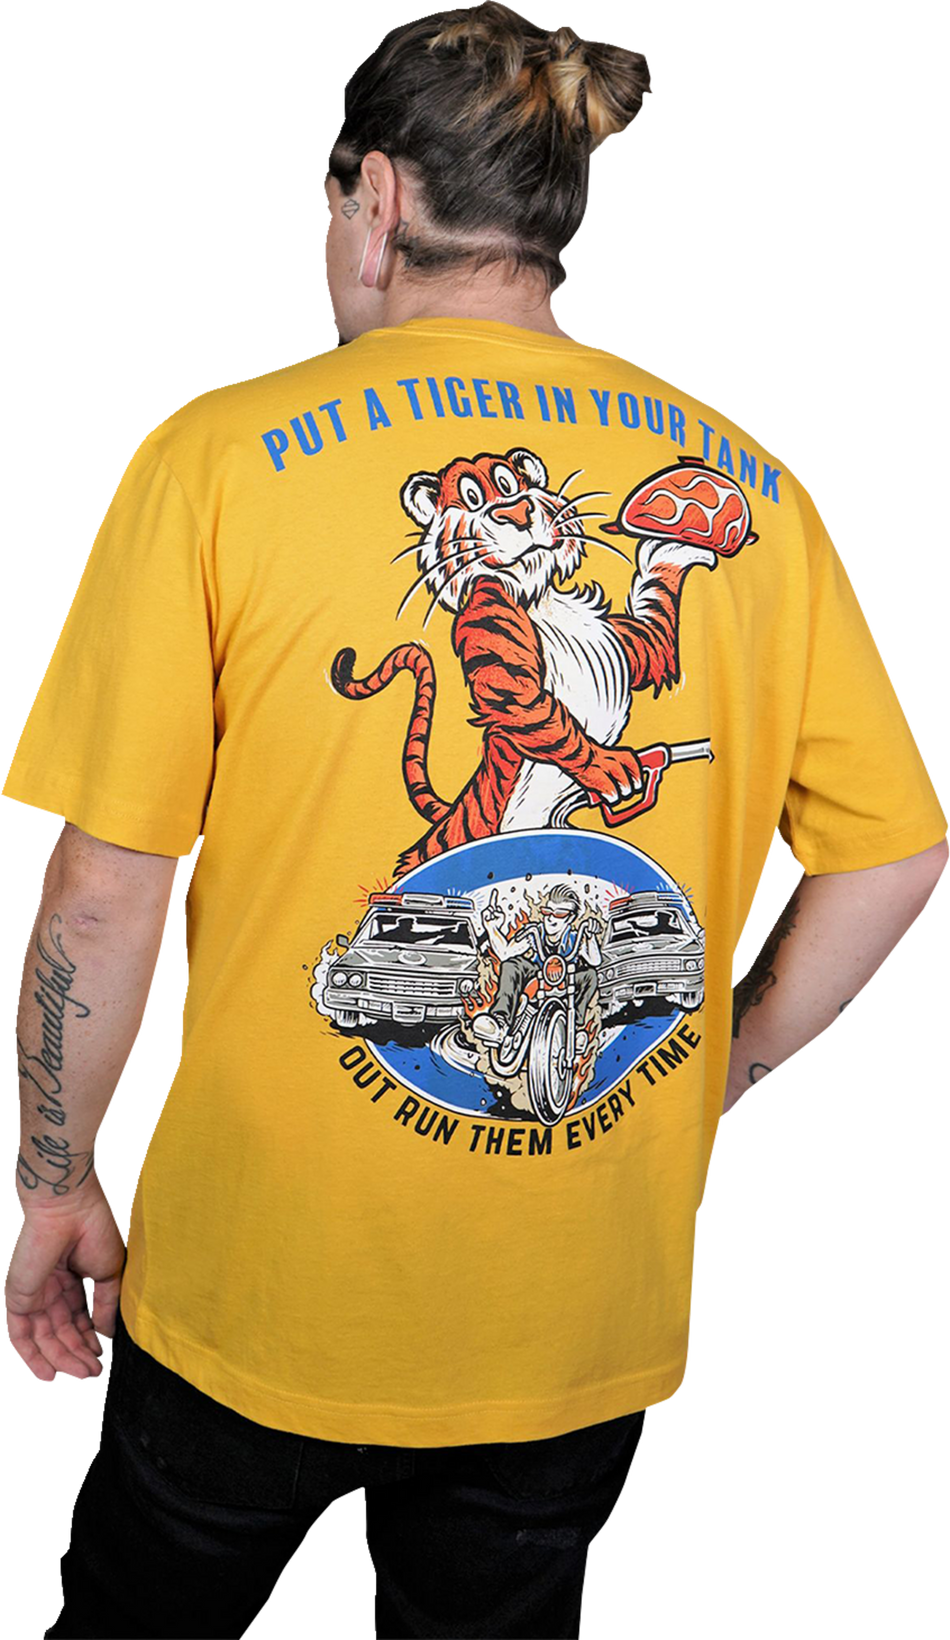 LETHAL THREAT Down-N-Out Tiger in Your Tank - Yellow - 2XL DT10051XXL